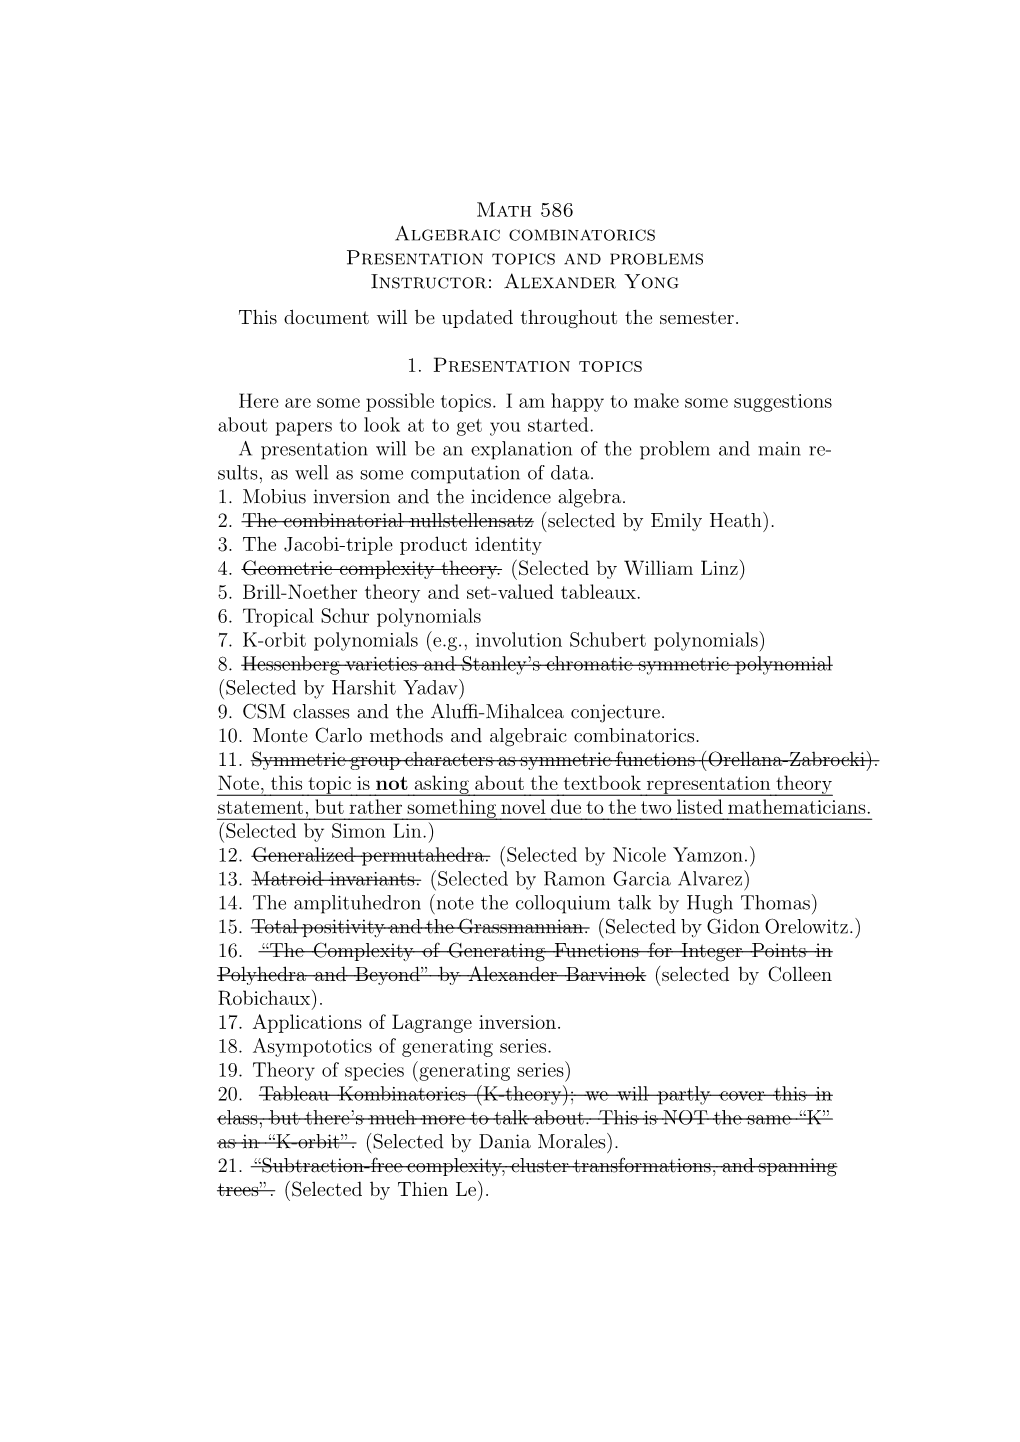 Math 586 Algebraic Combinatorics Presentation Topics and Problems Instructor: Alexander Yong This Document Will Be Updated Throughout the Semester